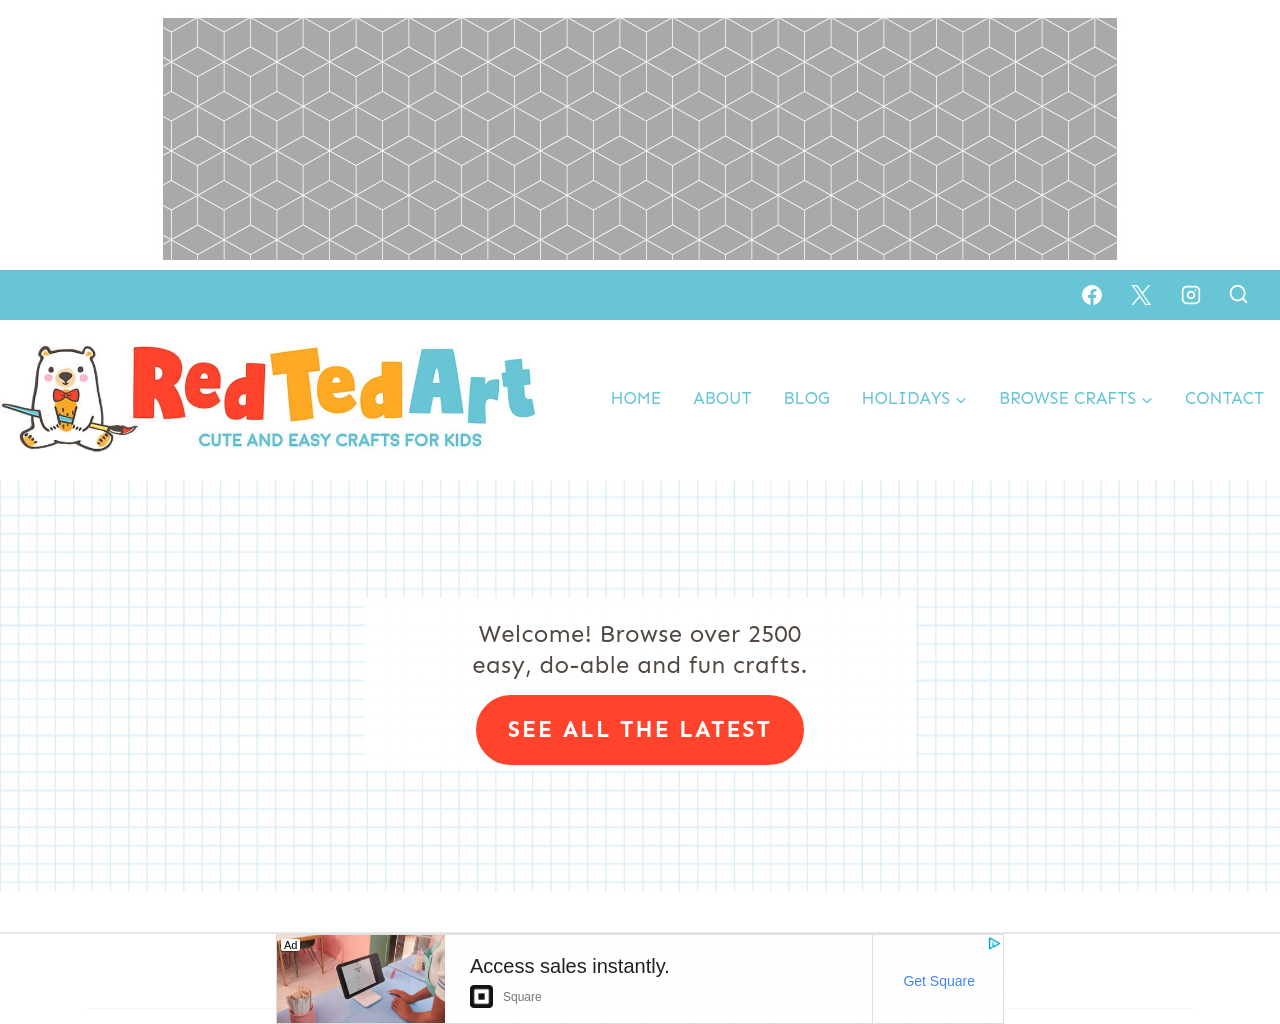 Red Ted Art